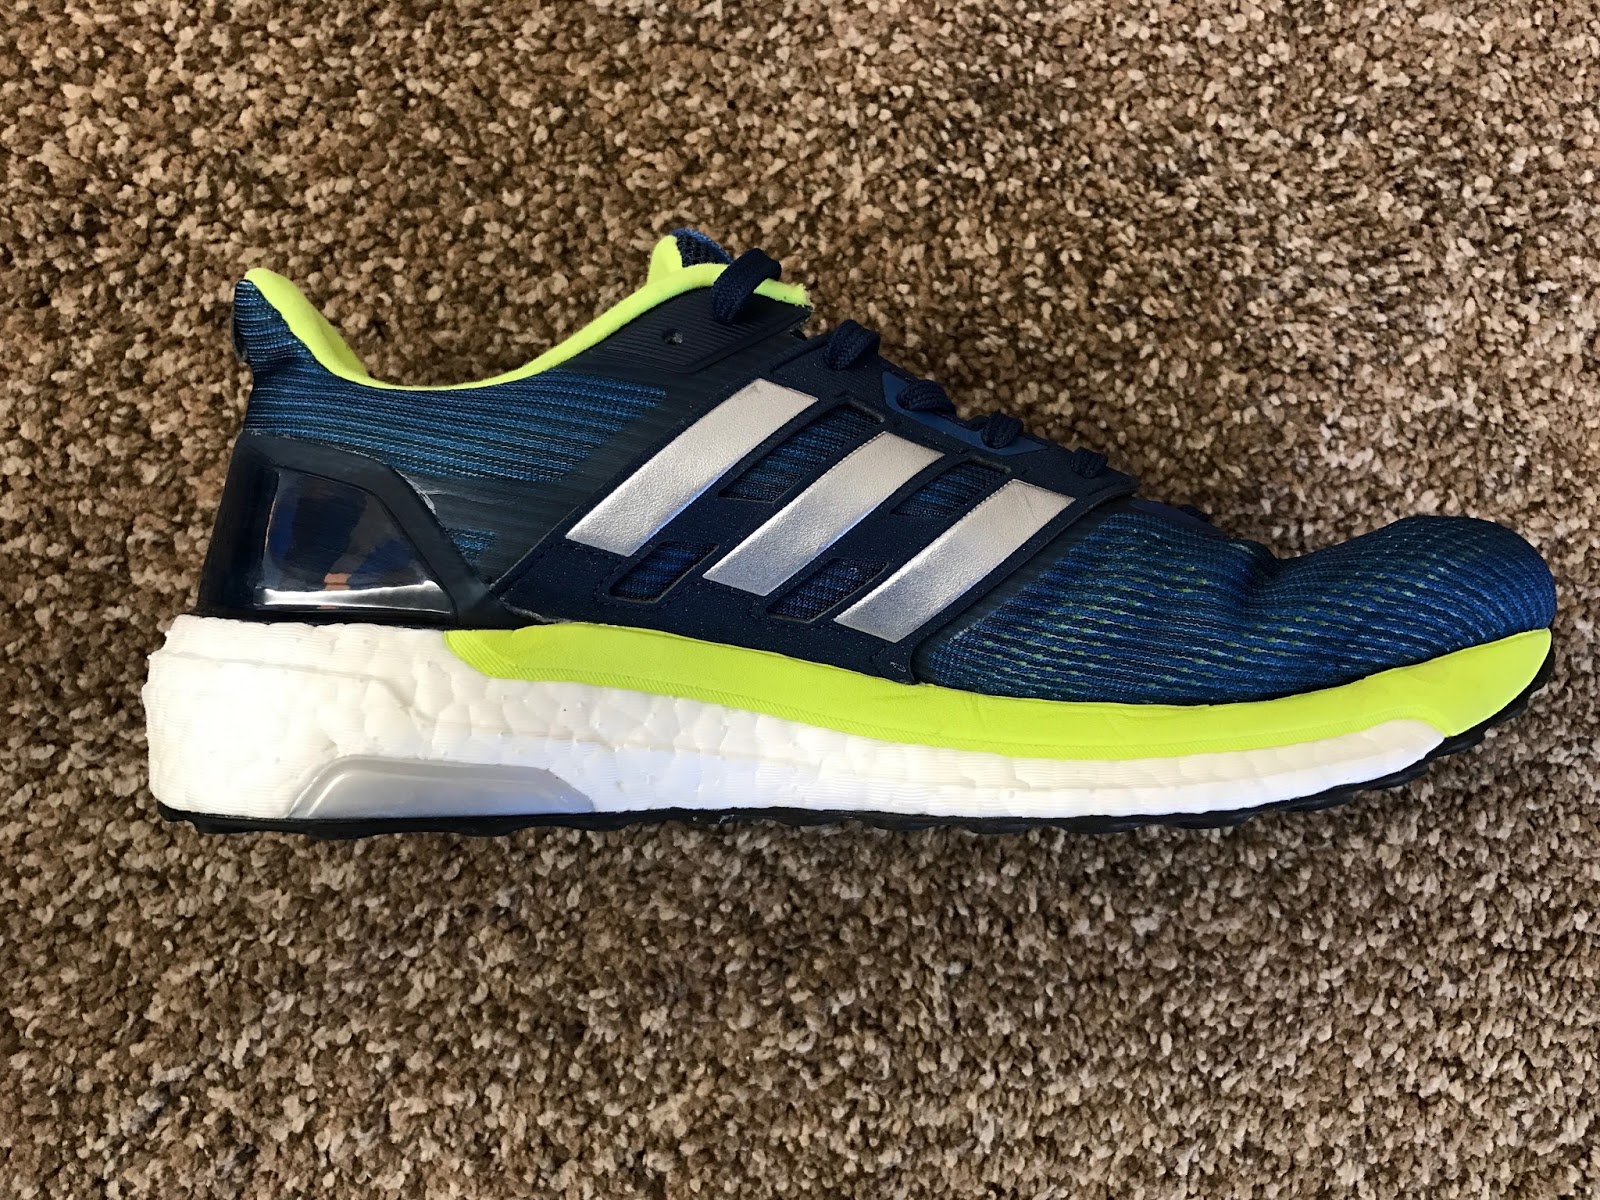 Road Trail Run: Reviews and Comparisons: Nike Vomero 12, Brooks Ghost 9, and adidas Supernova Glide 9